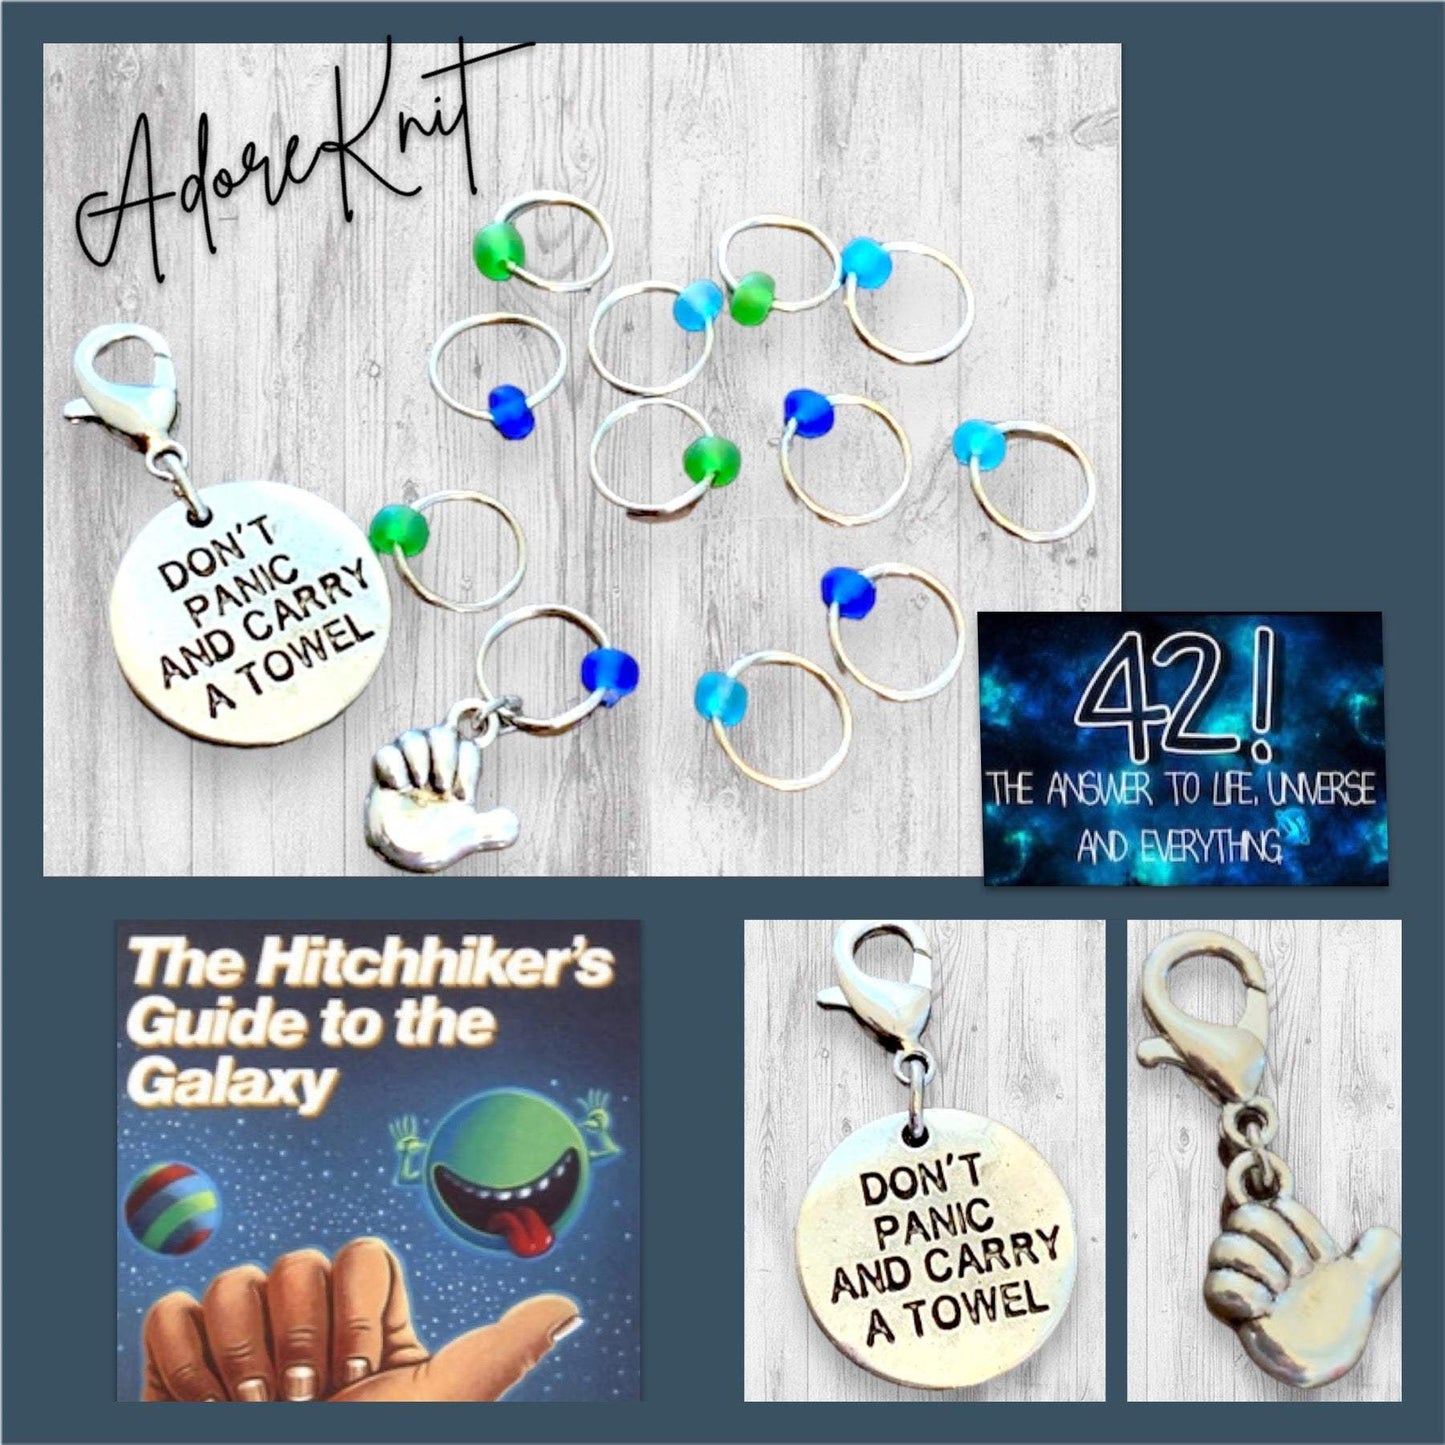 Hitchhiker's Progress and Stitch MarkersAdoreKnitHitchhiker's Progress and Stitch Markers.  Inspired by Douglas Adam's classic science fiction story 'Hitchhiker's Guide to the Galaxy'.  These stitch markers are greStitch Markers